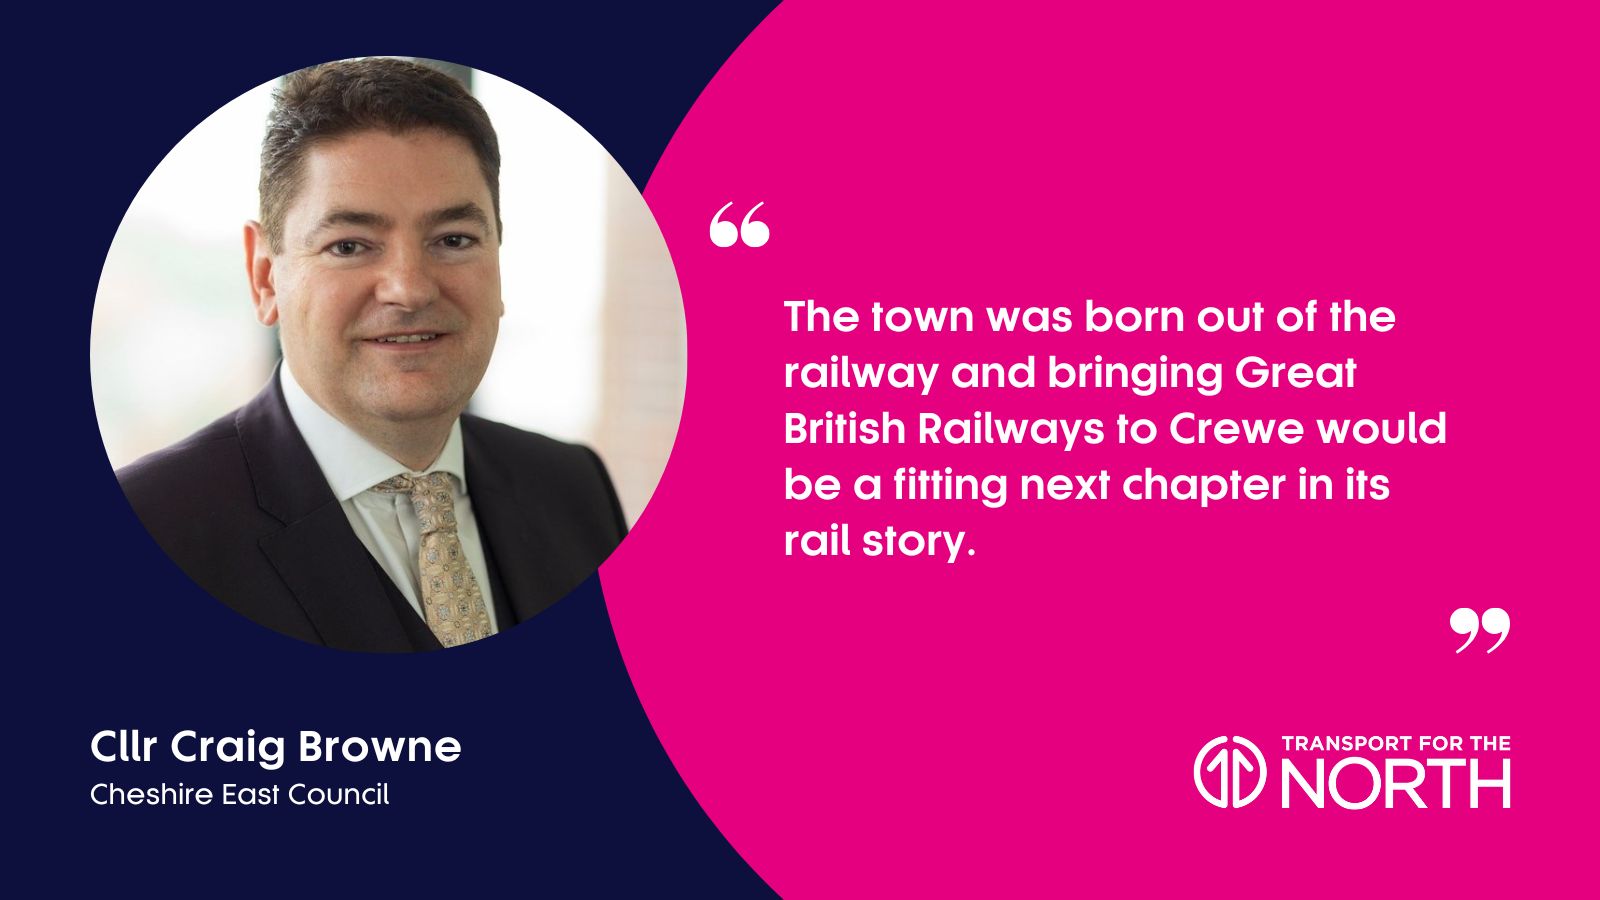 Cheshire East Council deputy leader Cllr Craig Browne on why Great British Railways HQ should be in Crewe